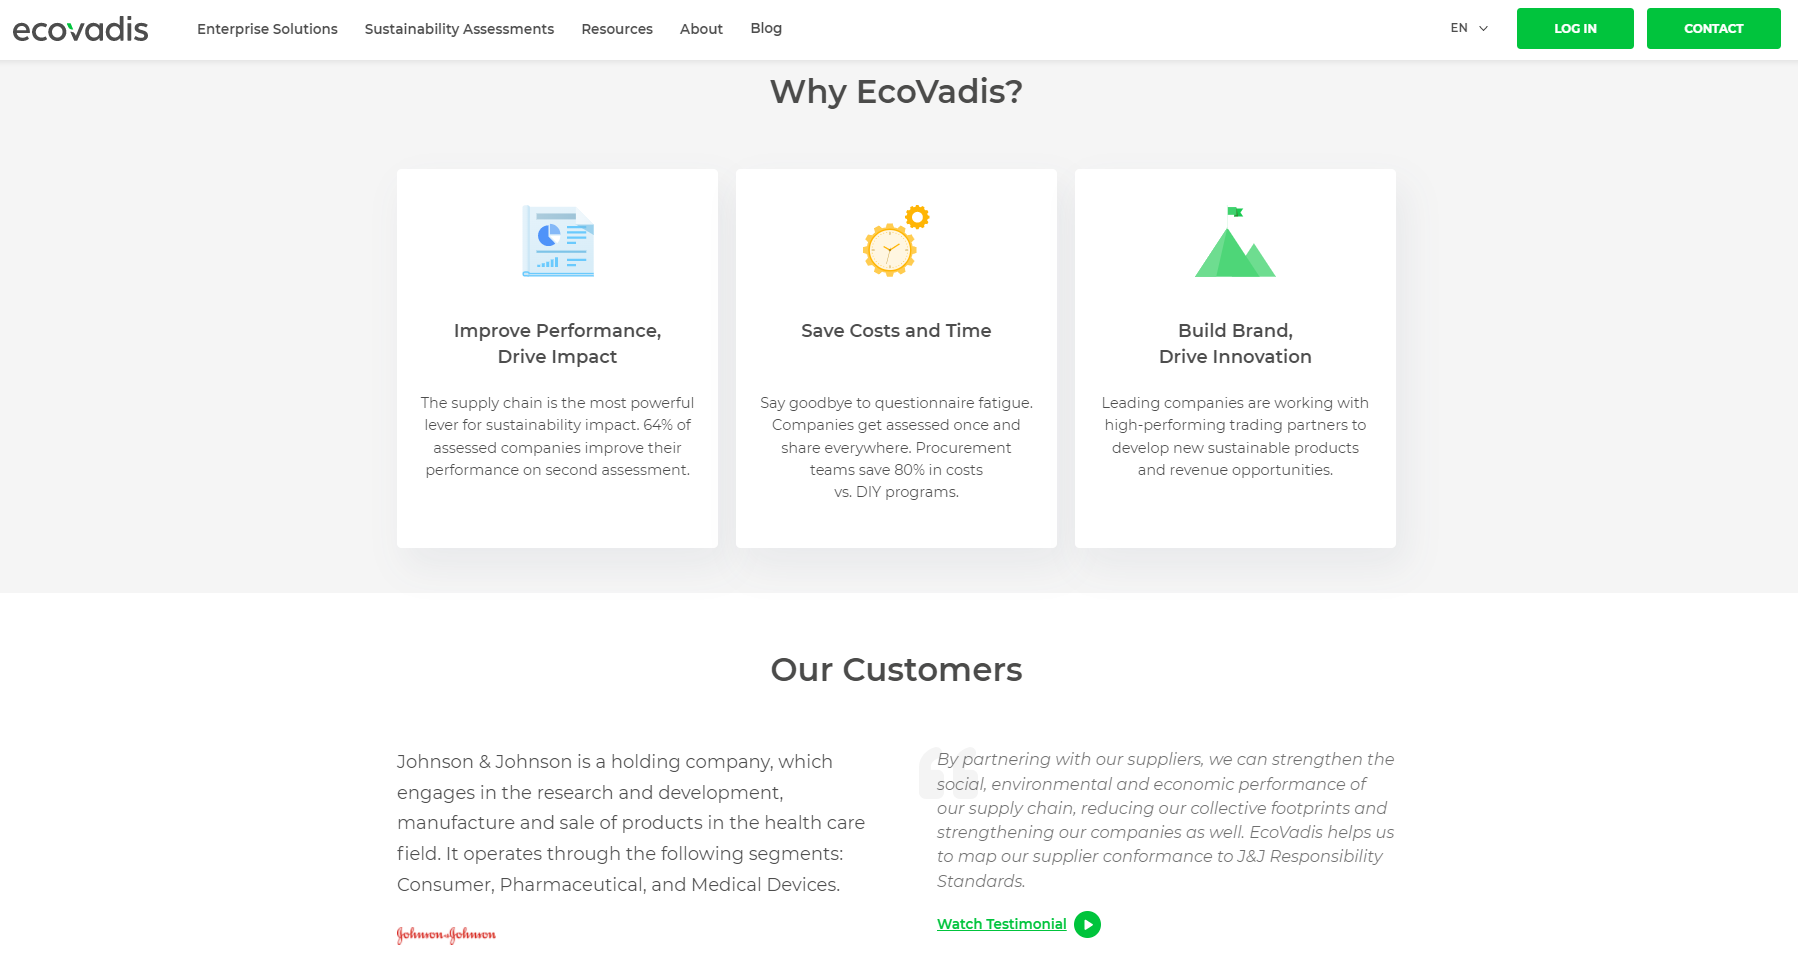 On the Ecovadis corporate website, users will find the advantages of using the services of this company